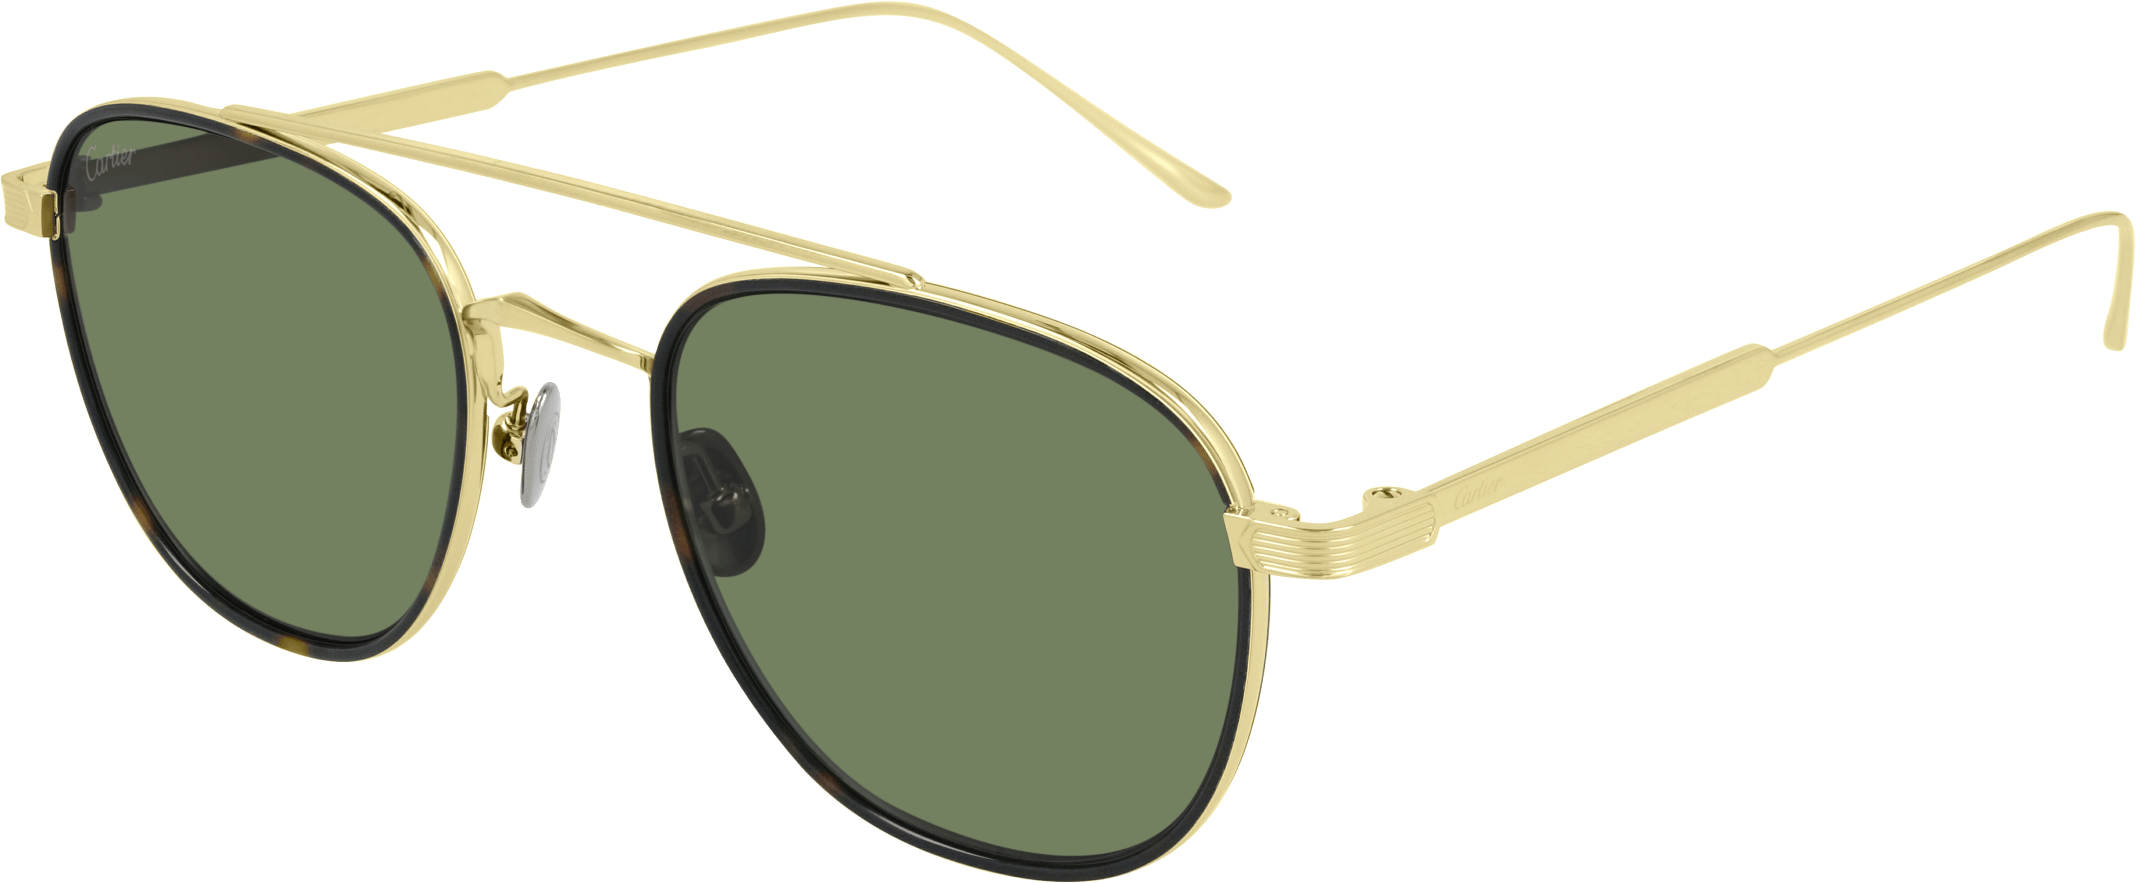 Color_CT0251S-002 - GOLD - GREEN - AR (ANTI REFLECTIVE) - POLARIZED